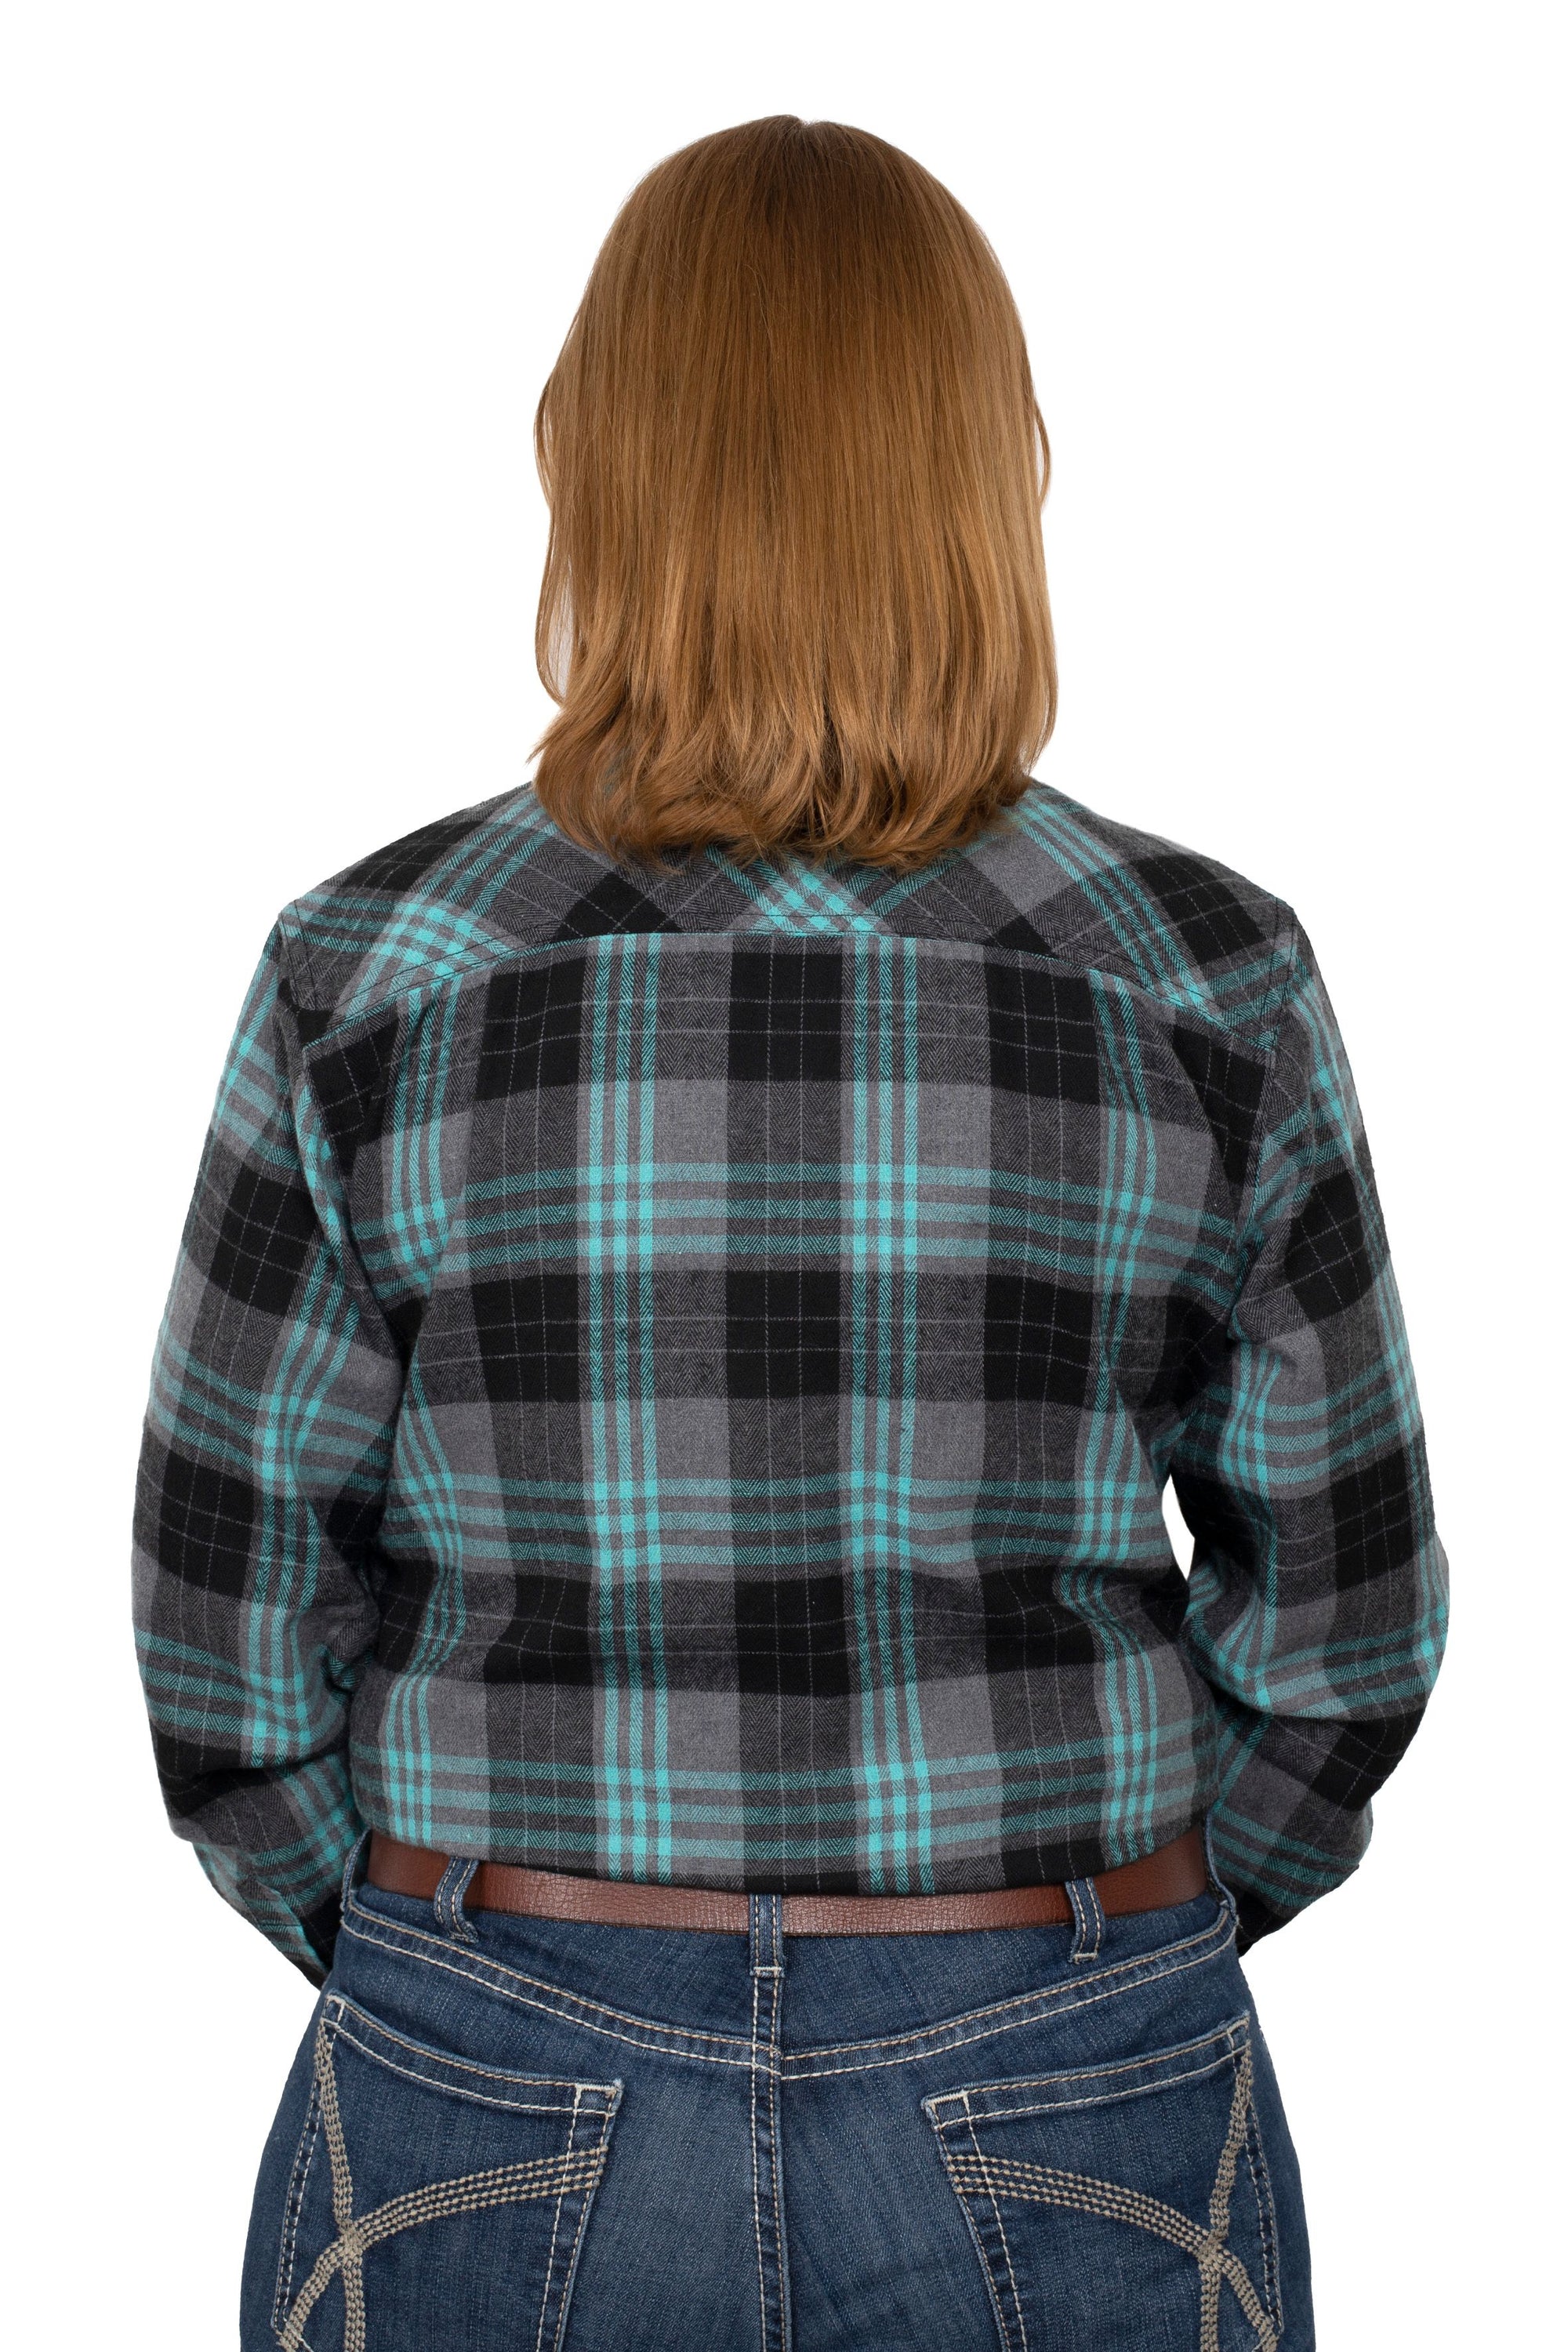 Just Country Wmns Jahna Workshirt Flannel Grey/Turquoise - Summer Clearance